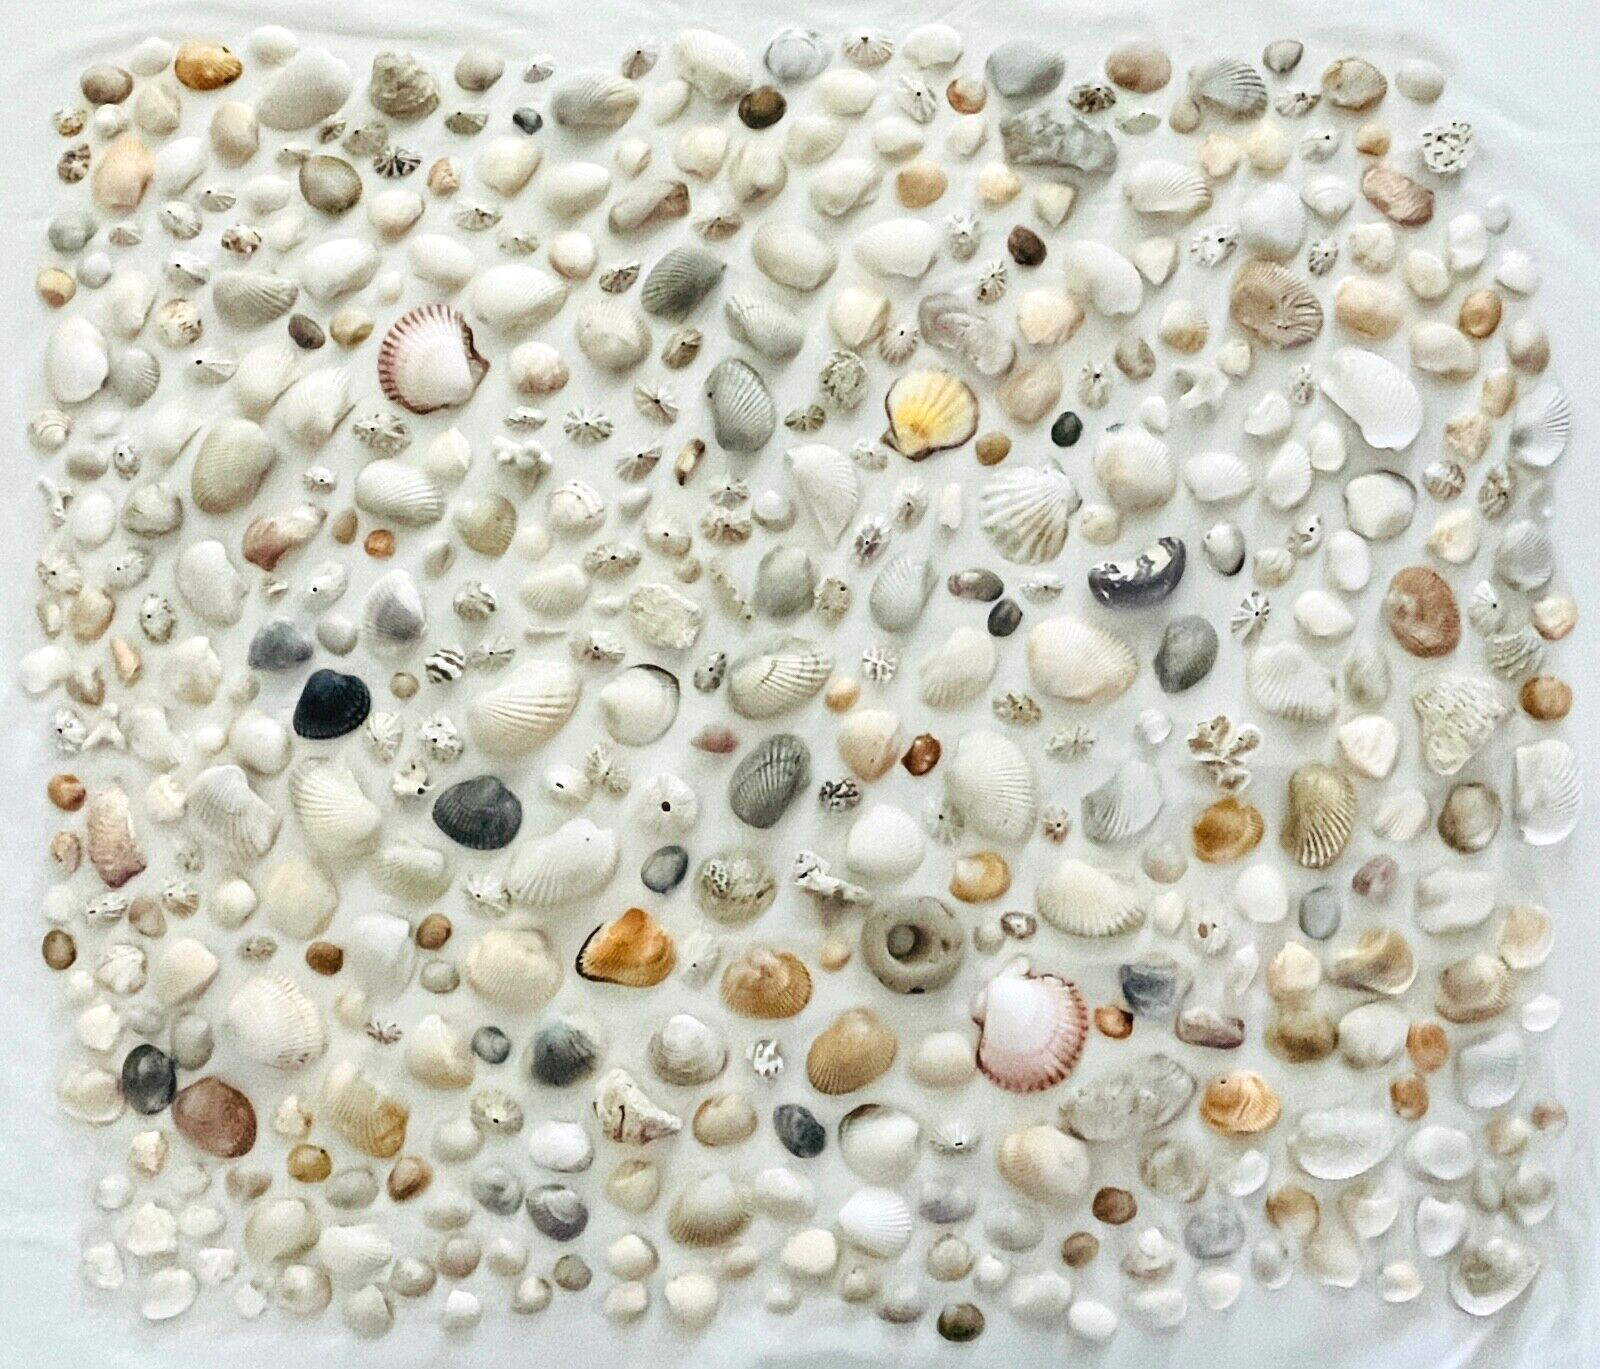 Primary image for Lot 400 Sea Shells Large Medium Small Keyhole Limpets Coral Nautical Beach Shore